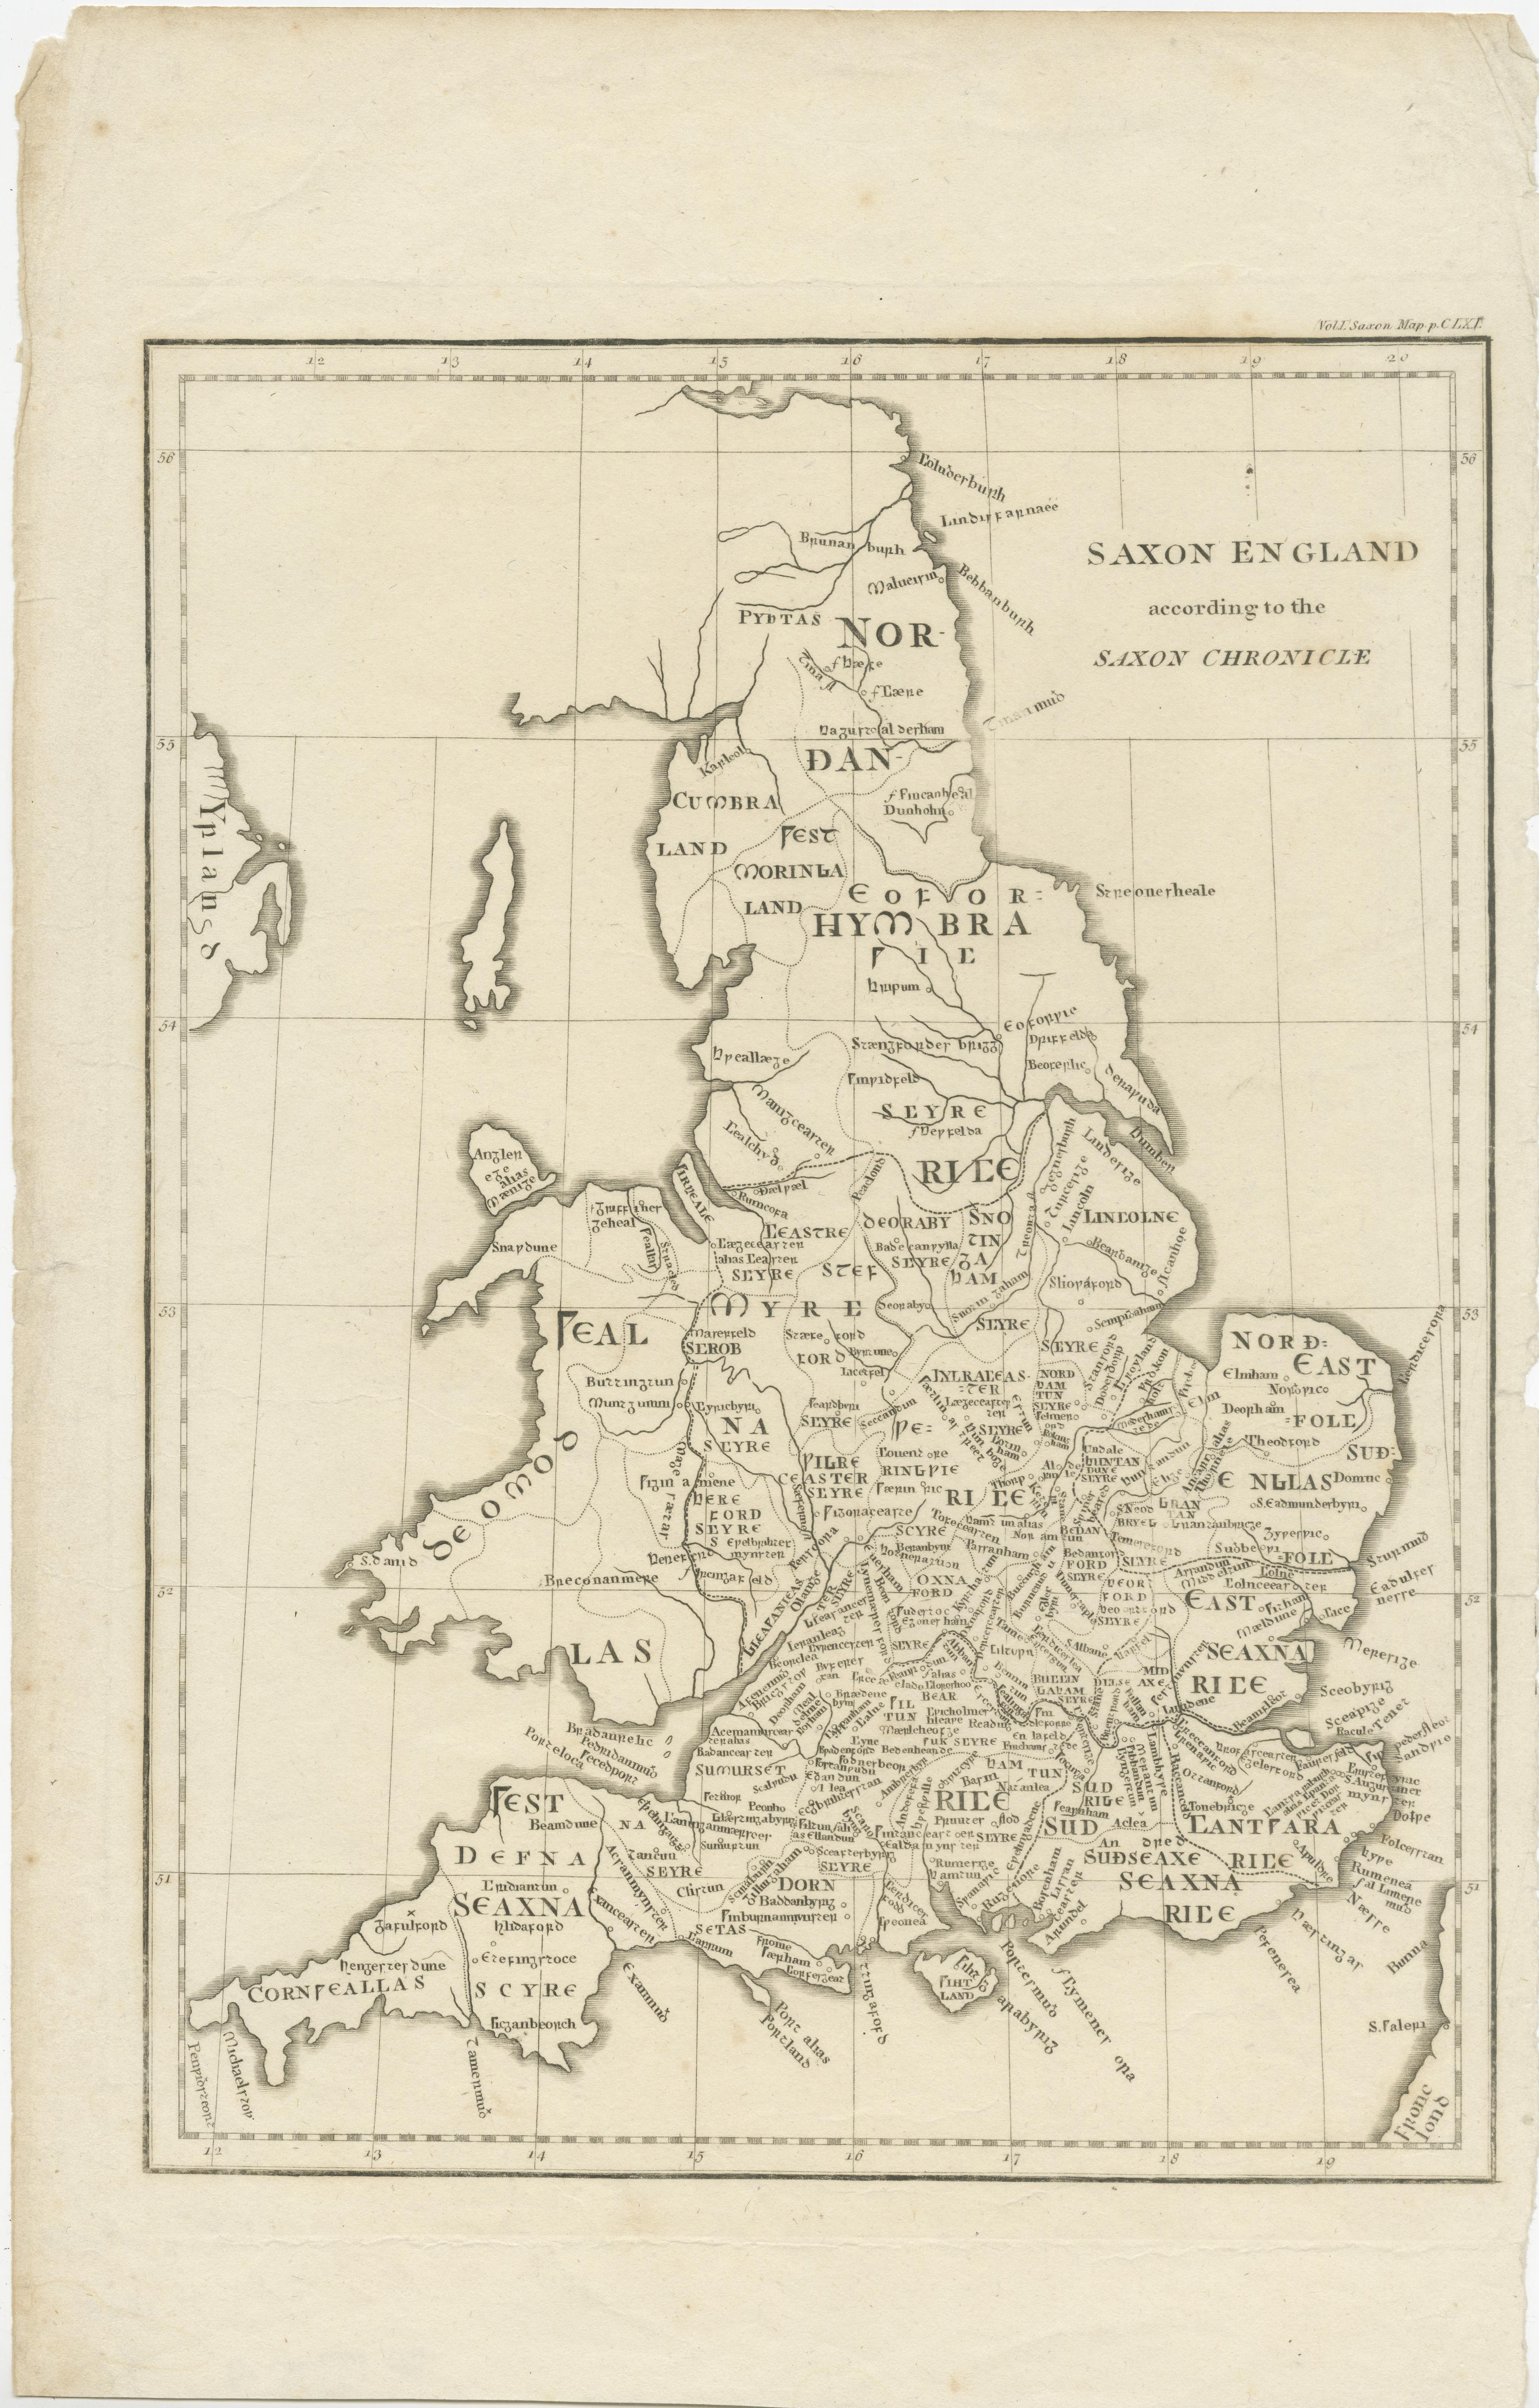 Antique map titled 'Saxon England According to the Saxon Chronicle'. Map of Saxon England based upon descriptions in the Anglo-Saxon Chronicle, a collection of annals in Old English chronicling the history of the Anglo-Saxons. 

This map